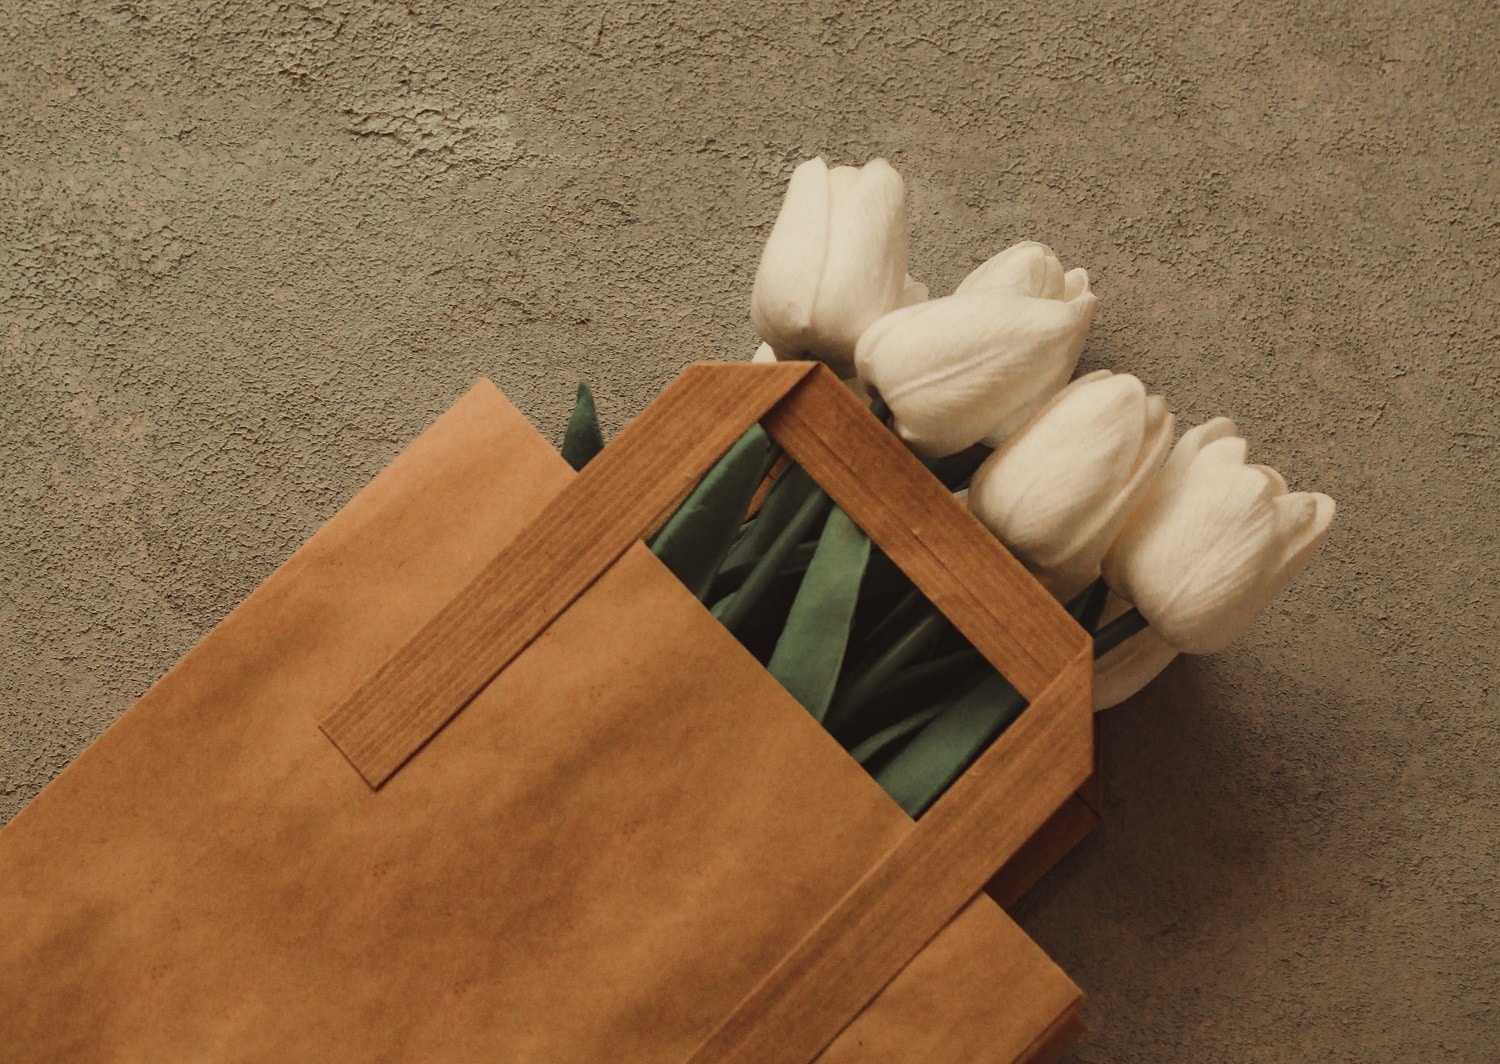 Paper bags are a popular alternative to plastic bags to reduce the environmental impacts caused by using plastics.